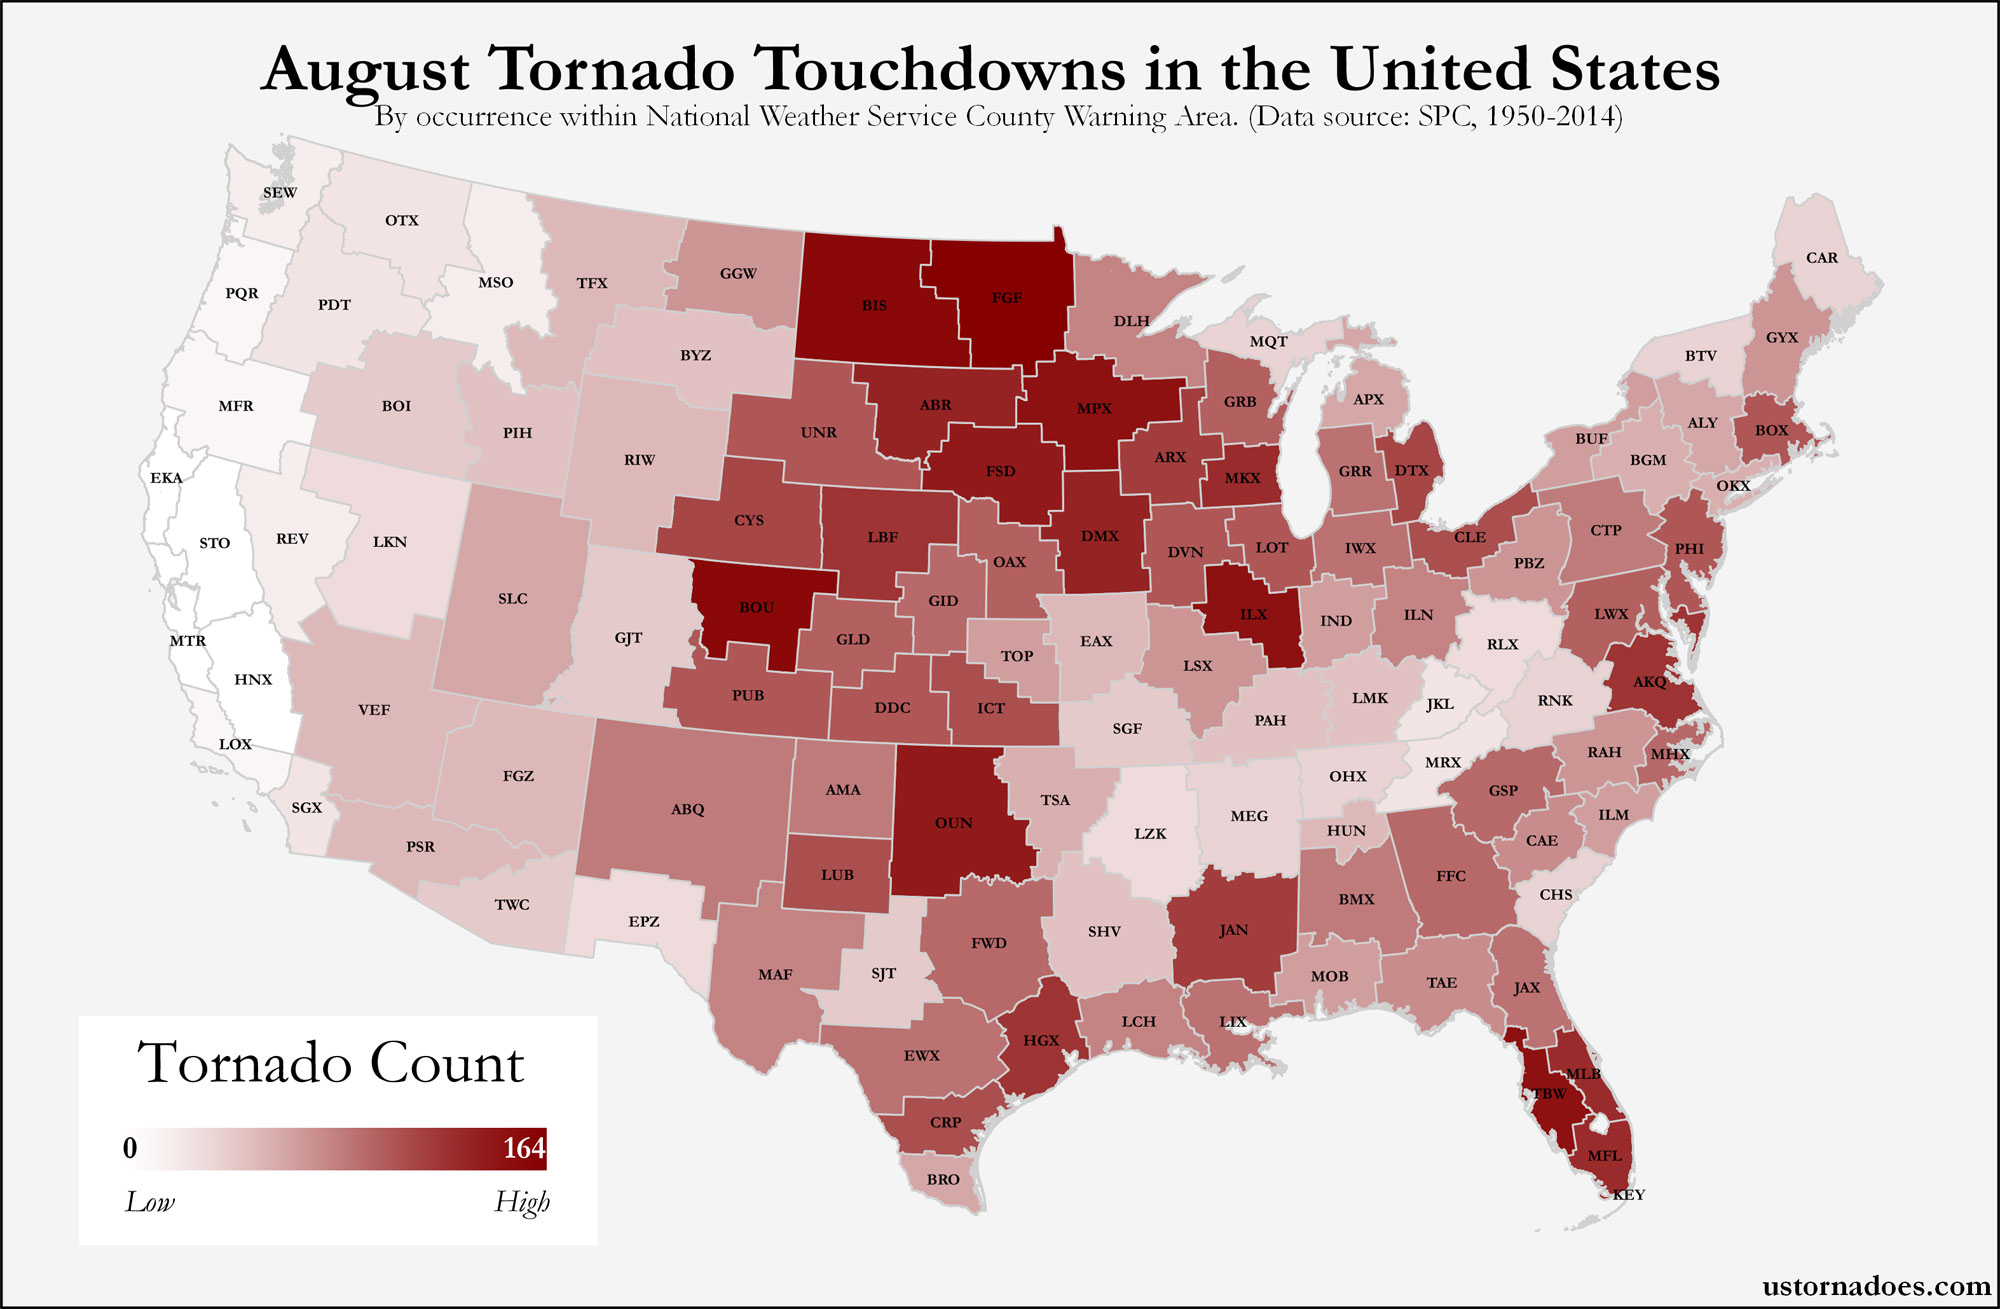 Here’s where tornadoes typically form in August across the United States